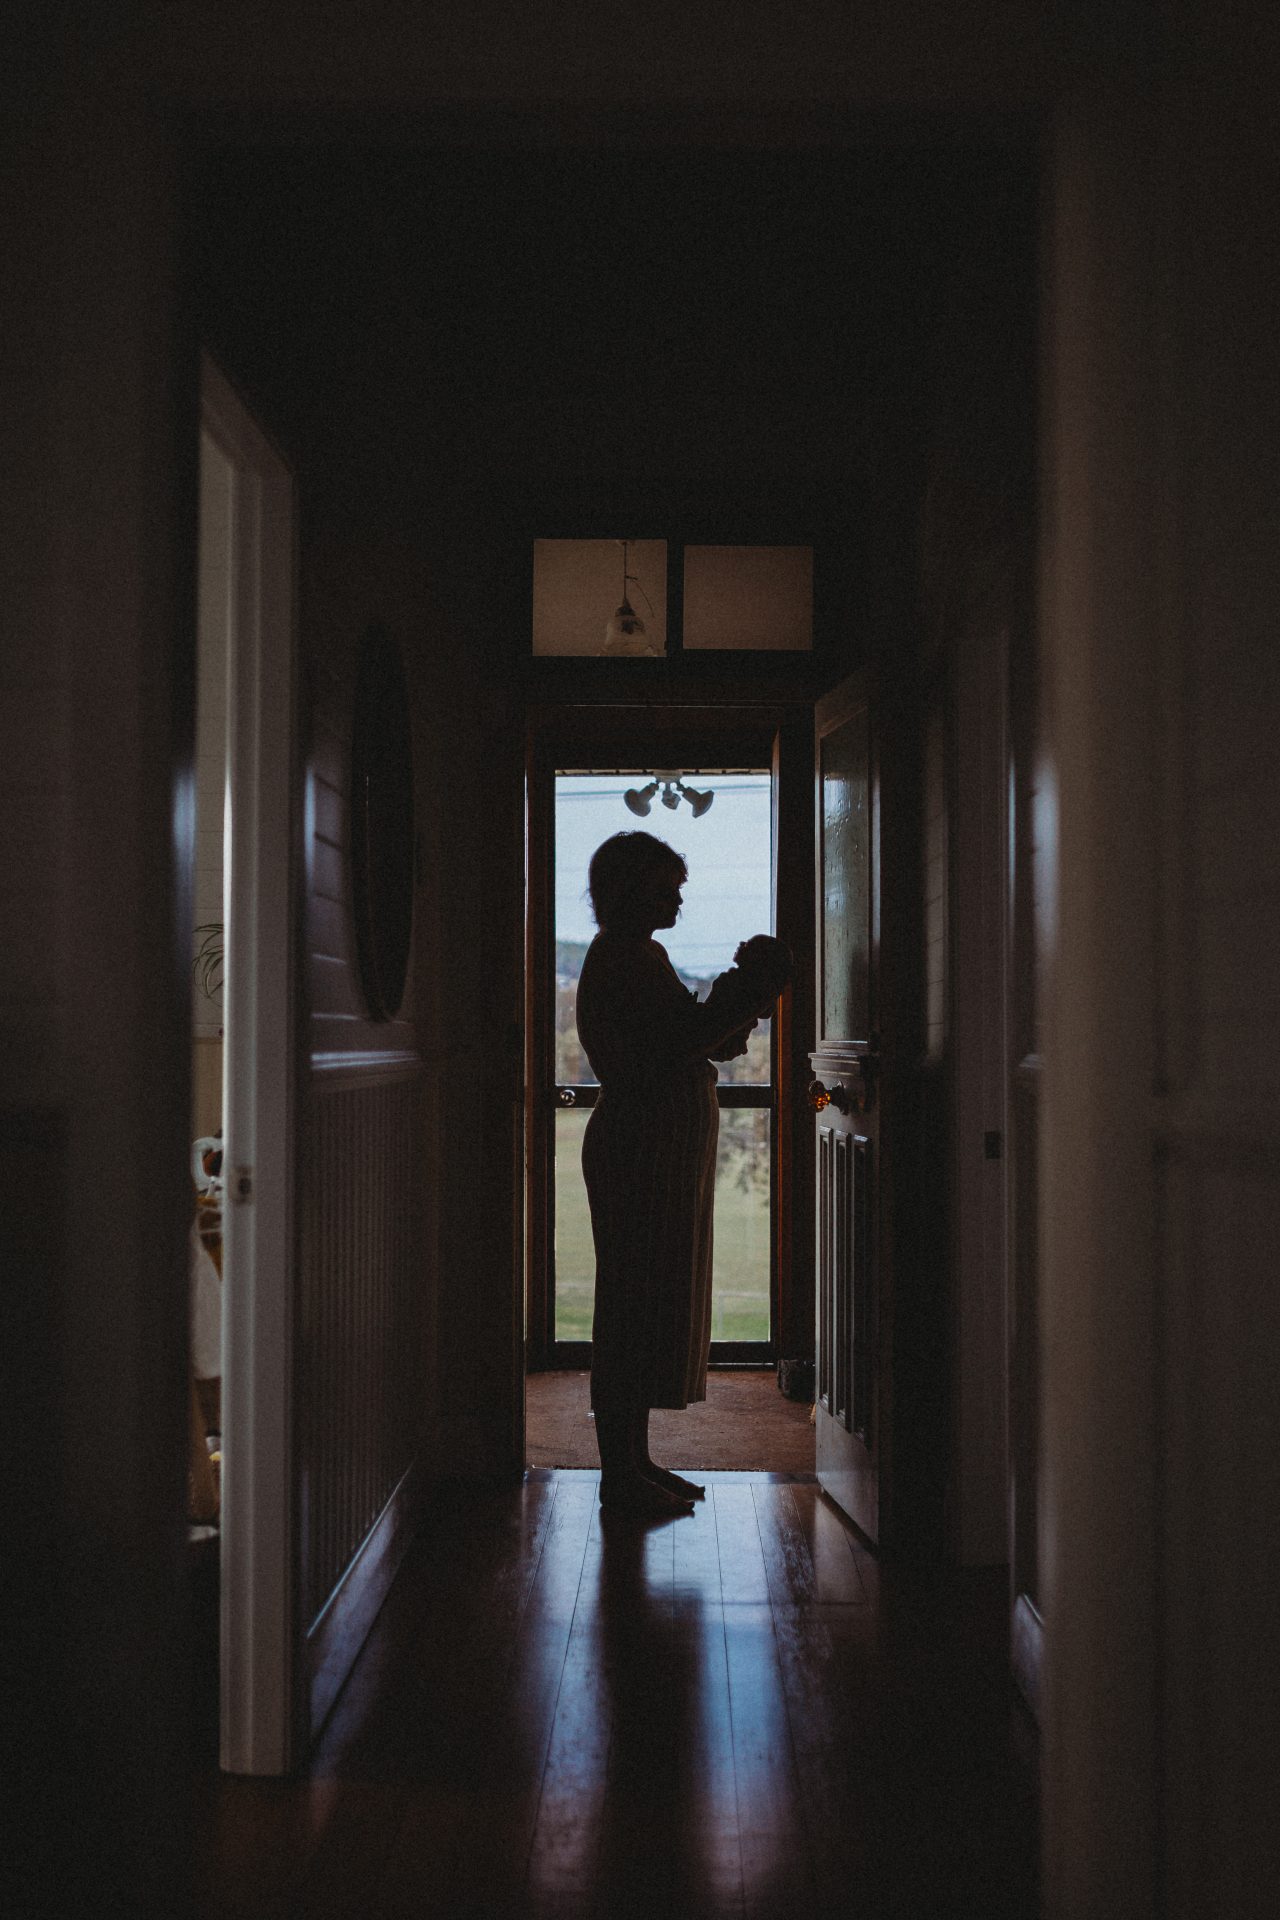 Silhouette of mother and baby in front of a door, down a hallway